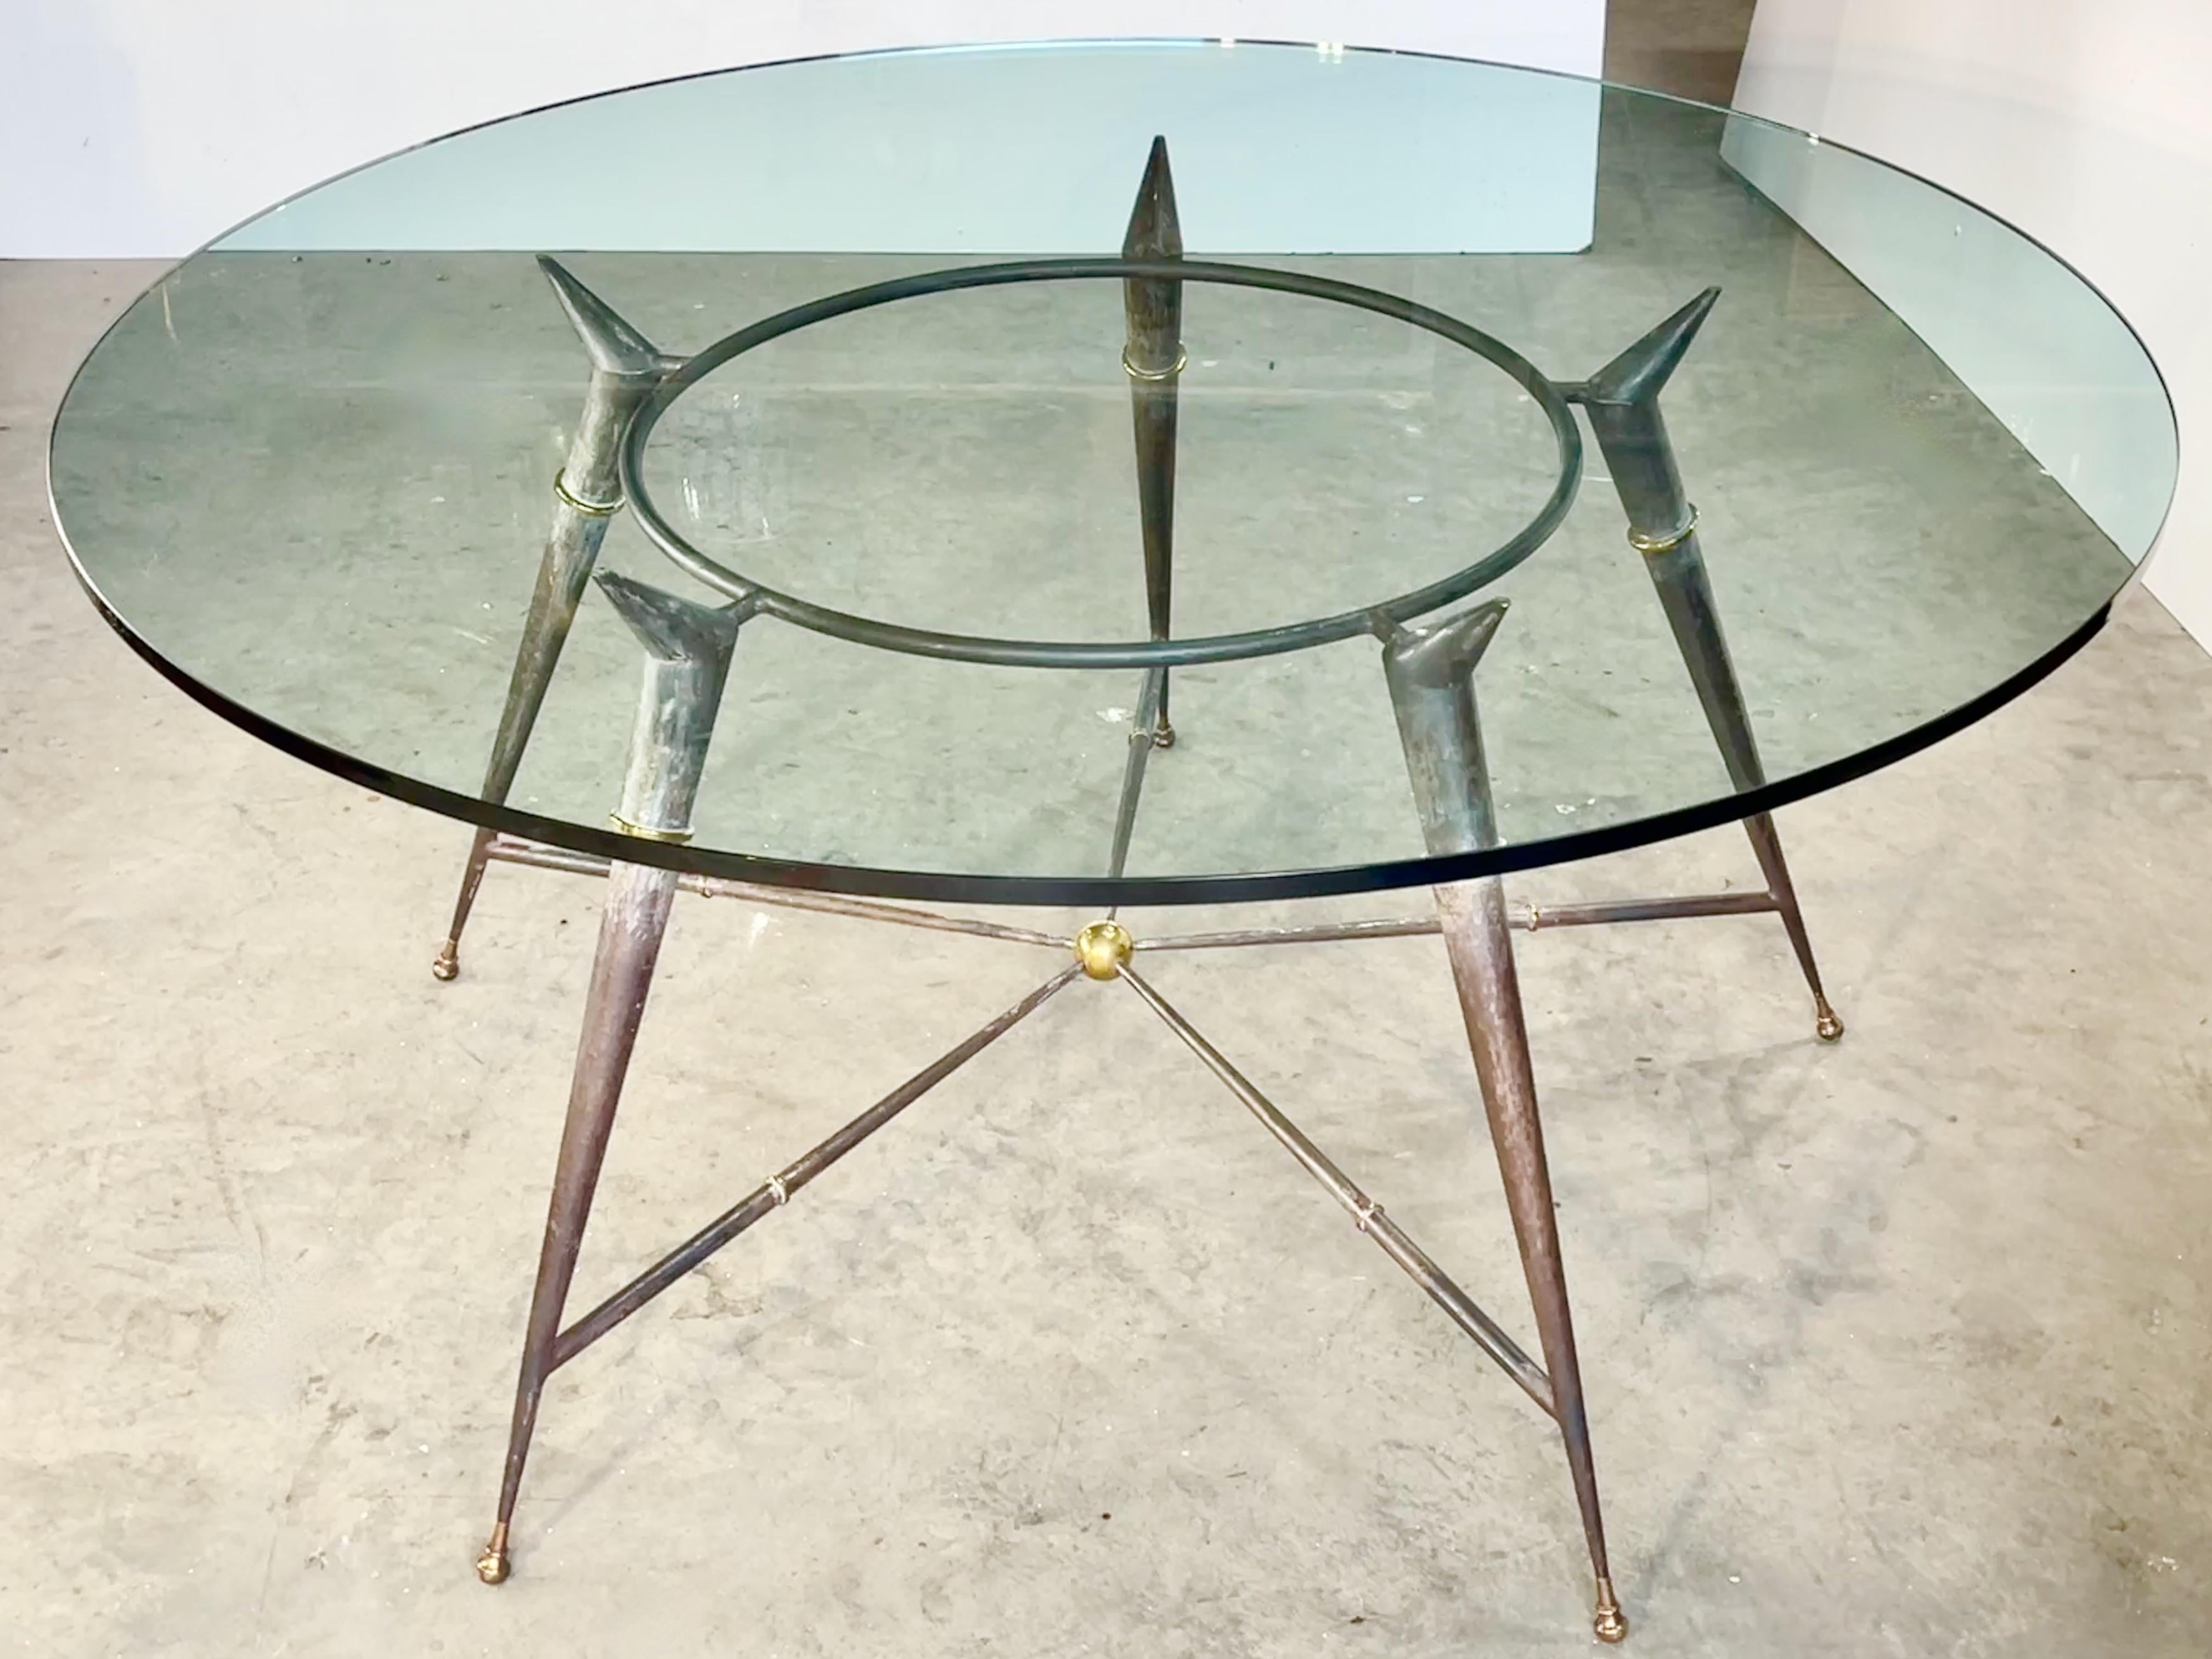 Vintage modernist five tapered leg round garden table made of patinated cast and forged iron with brass sabots and embellishments and a 60 inch round glass top 3/4 inch thick.
Space between legs is 31 inches.
Depth between edge of glass and center